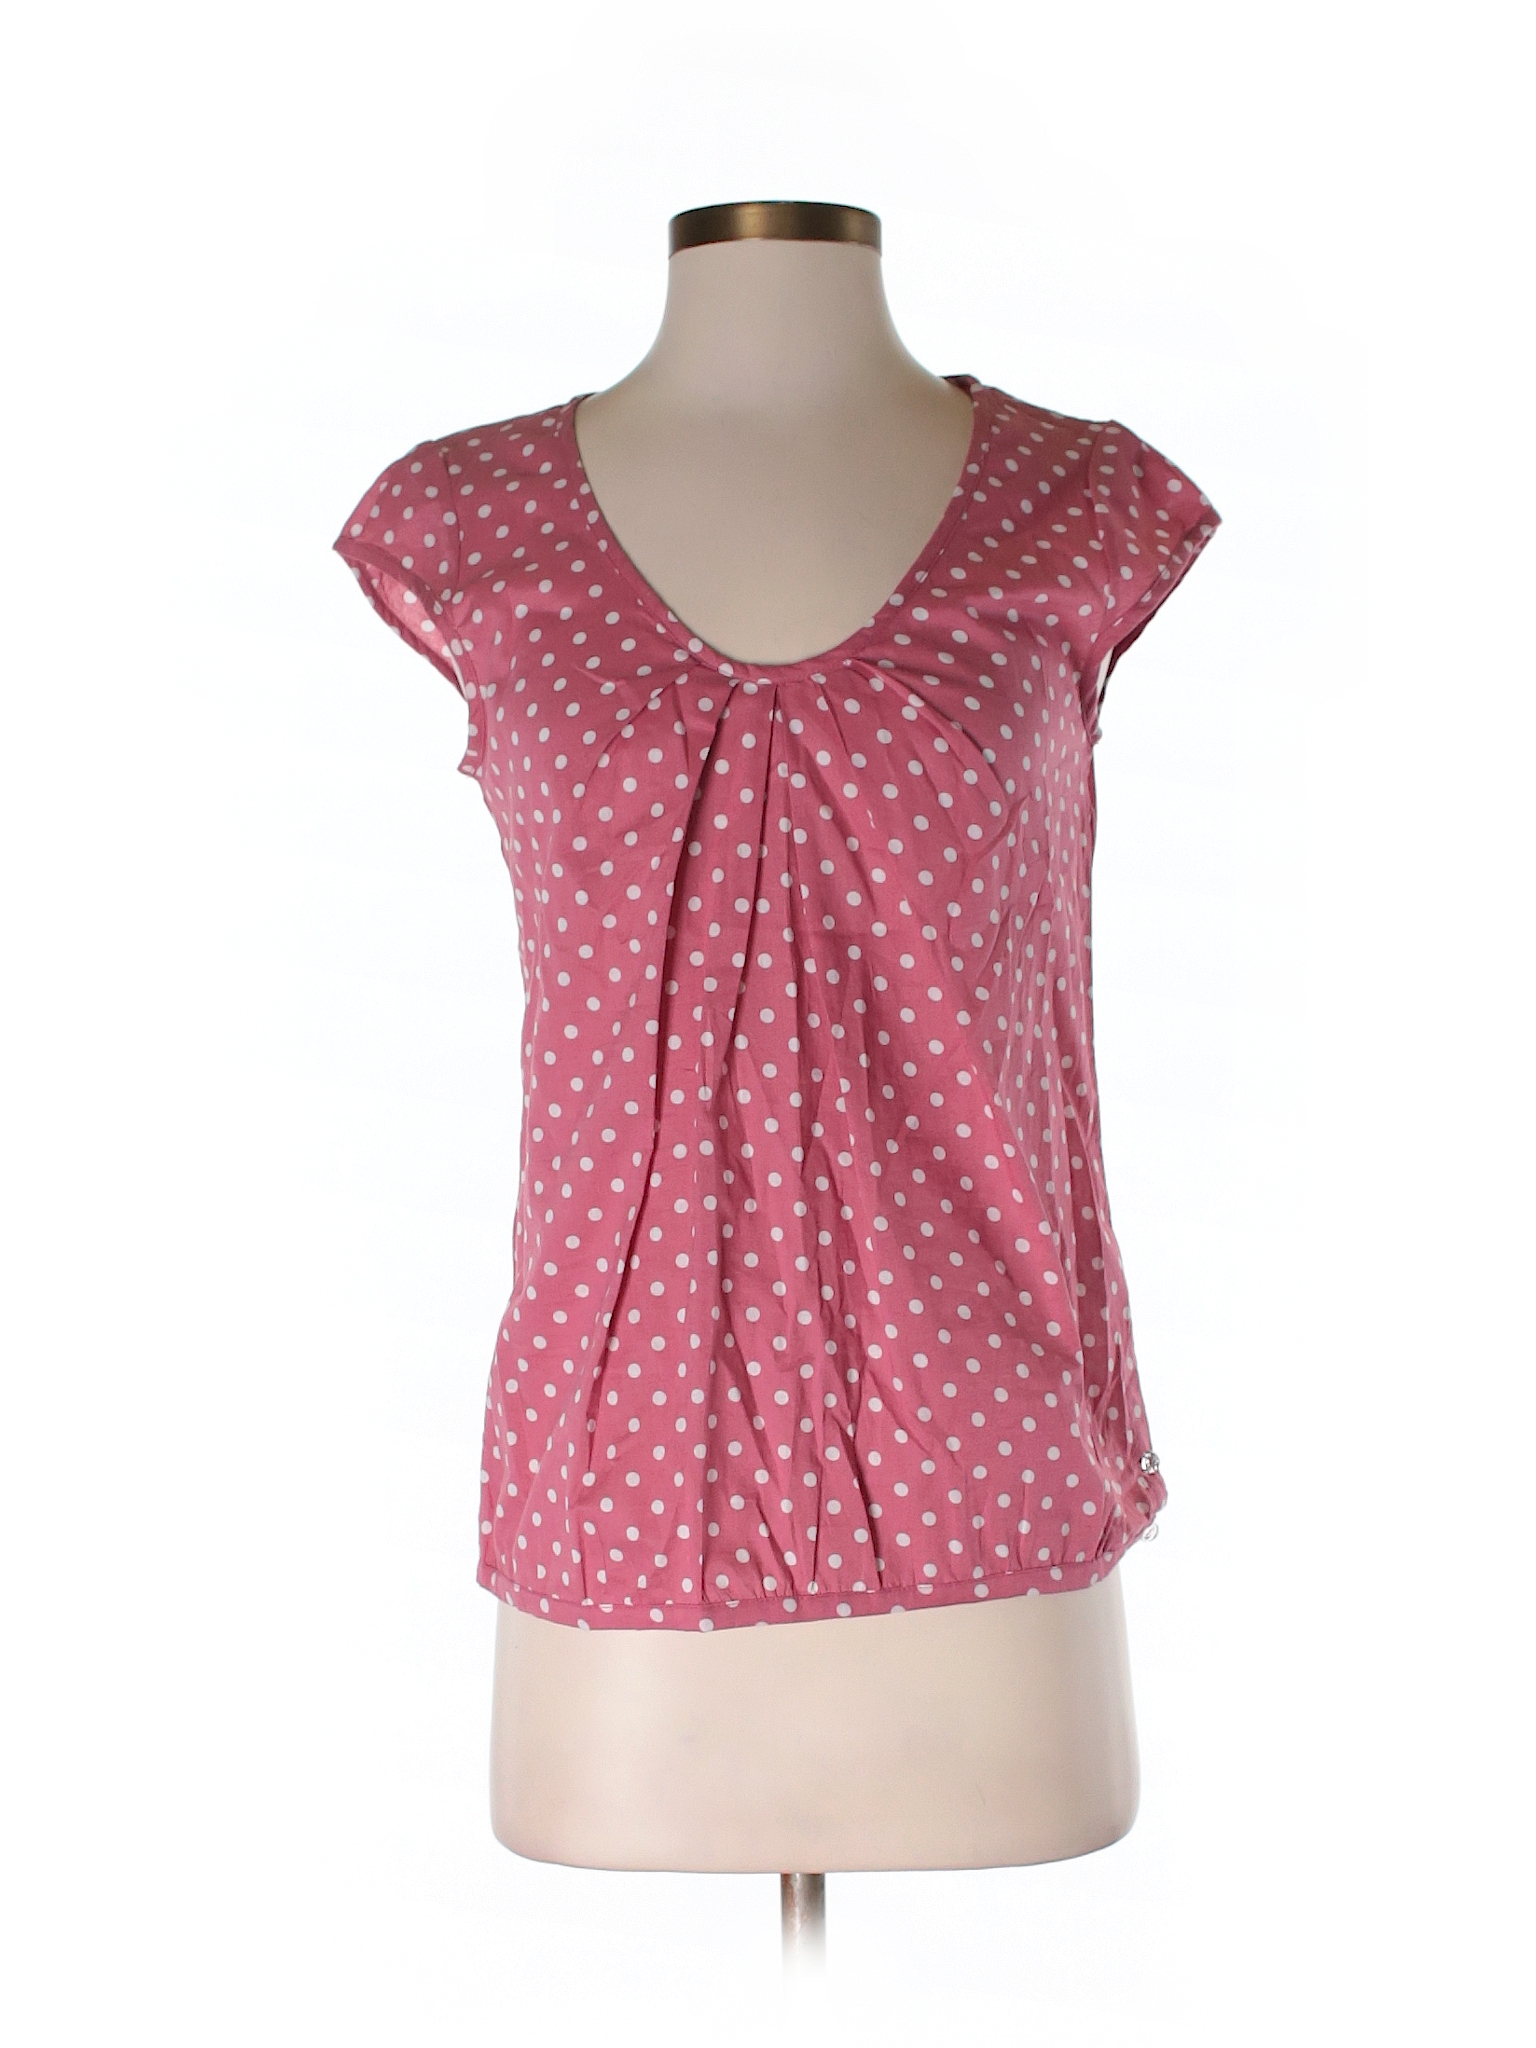 Emily and Fin 100% Cotton Polka Dots Coral Short Sleeve Blouse Size S ...